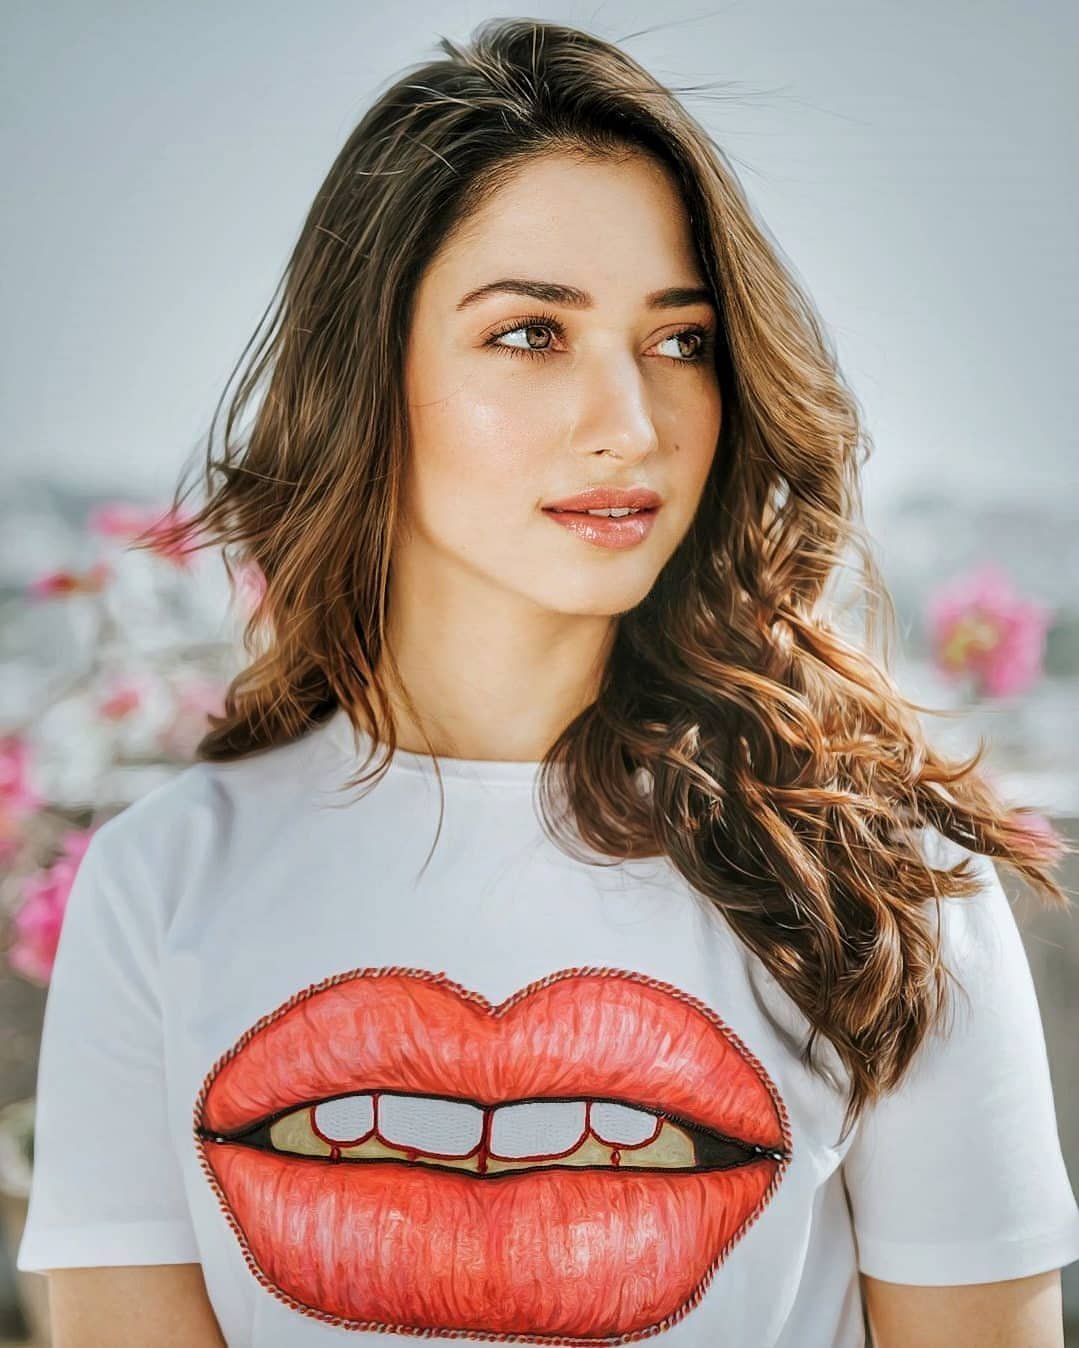 Tamannah Madly irked The Mention of her name